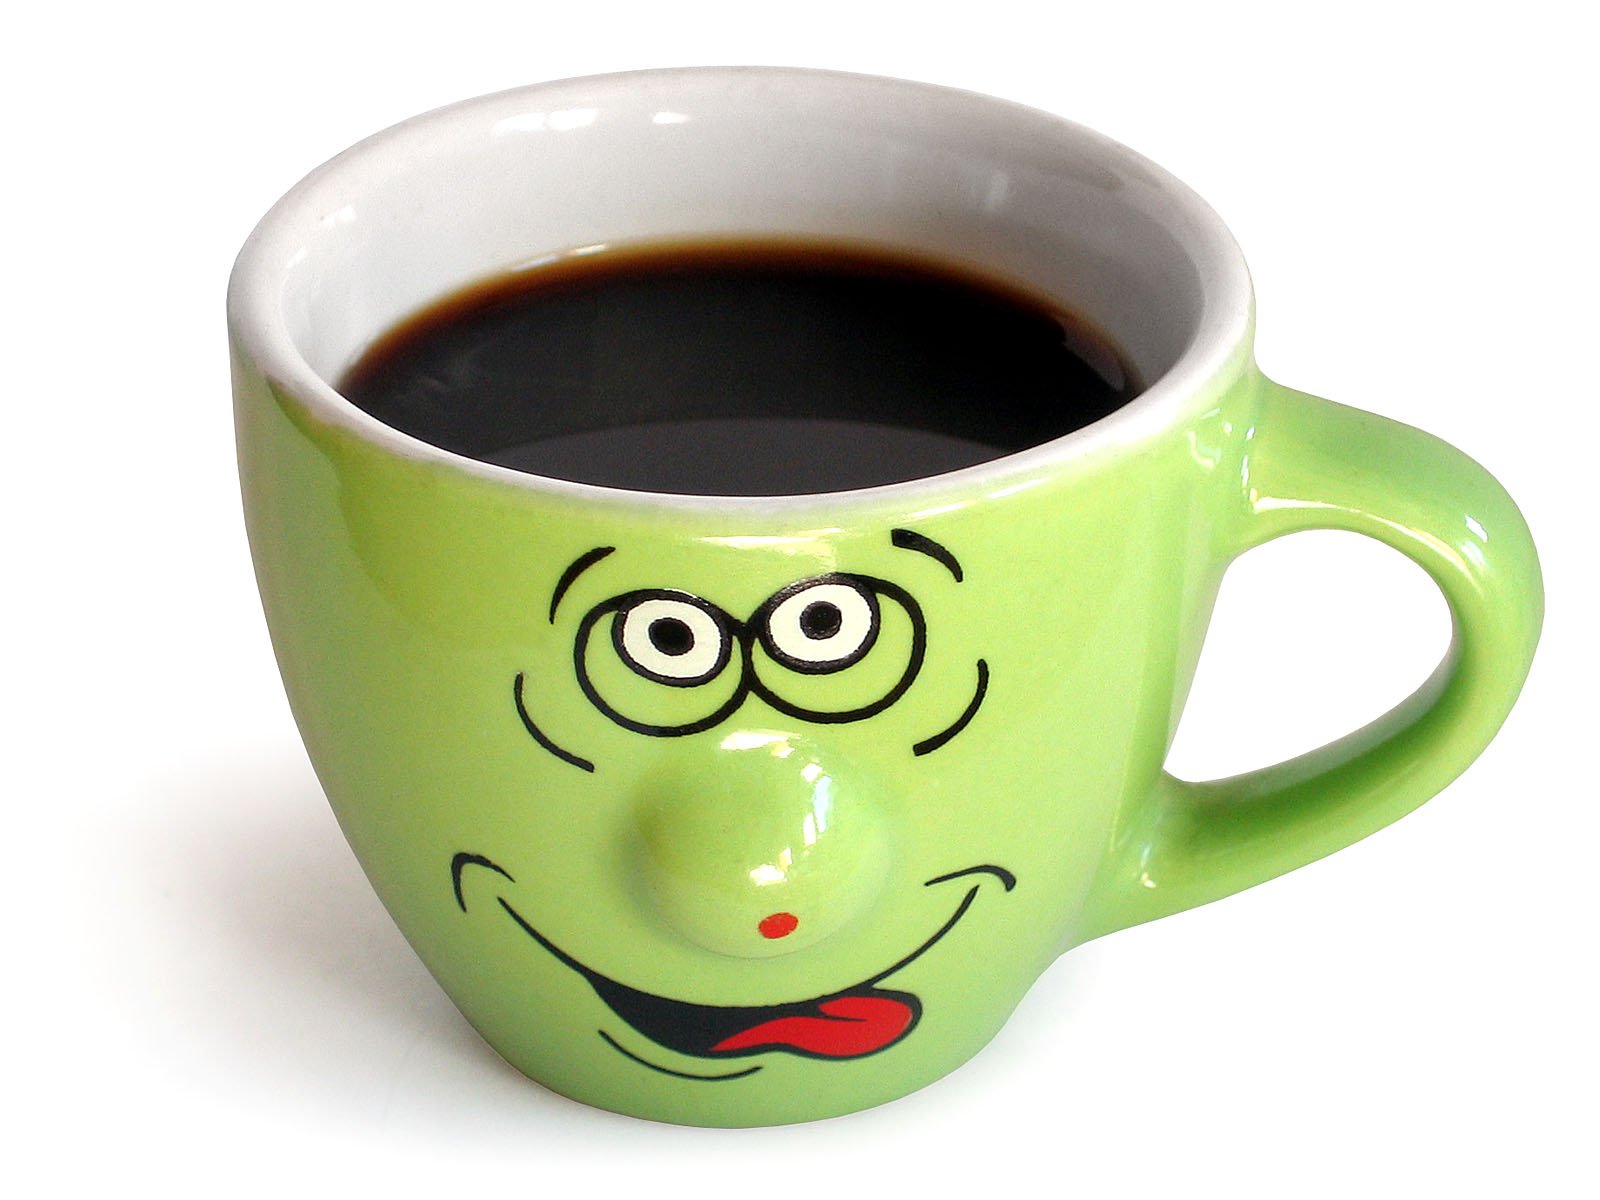 the mug is filled with black coffee and has an animated face